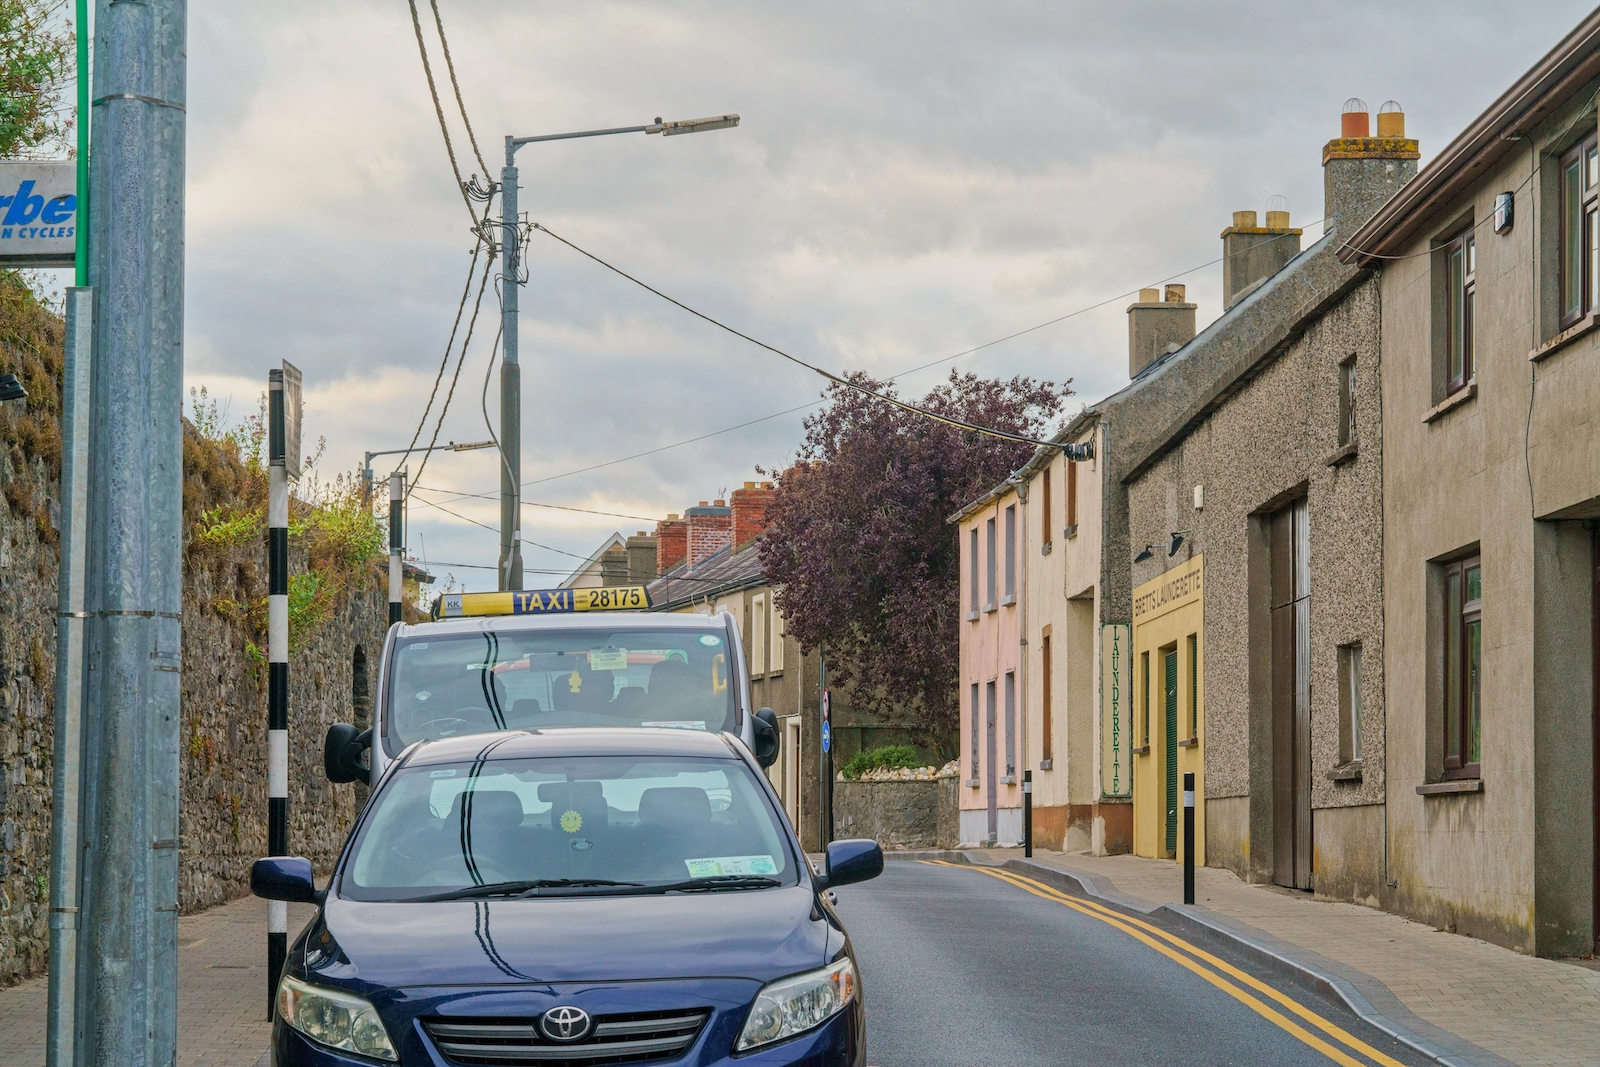 michael-street-in-the-city-of-kilkenny-[august-2018]-227086-excellent